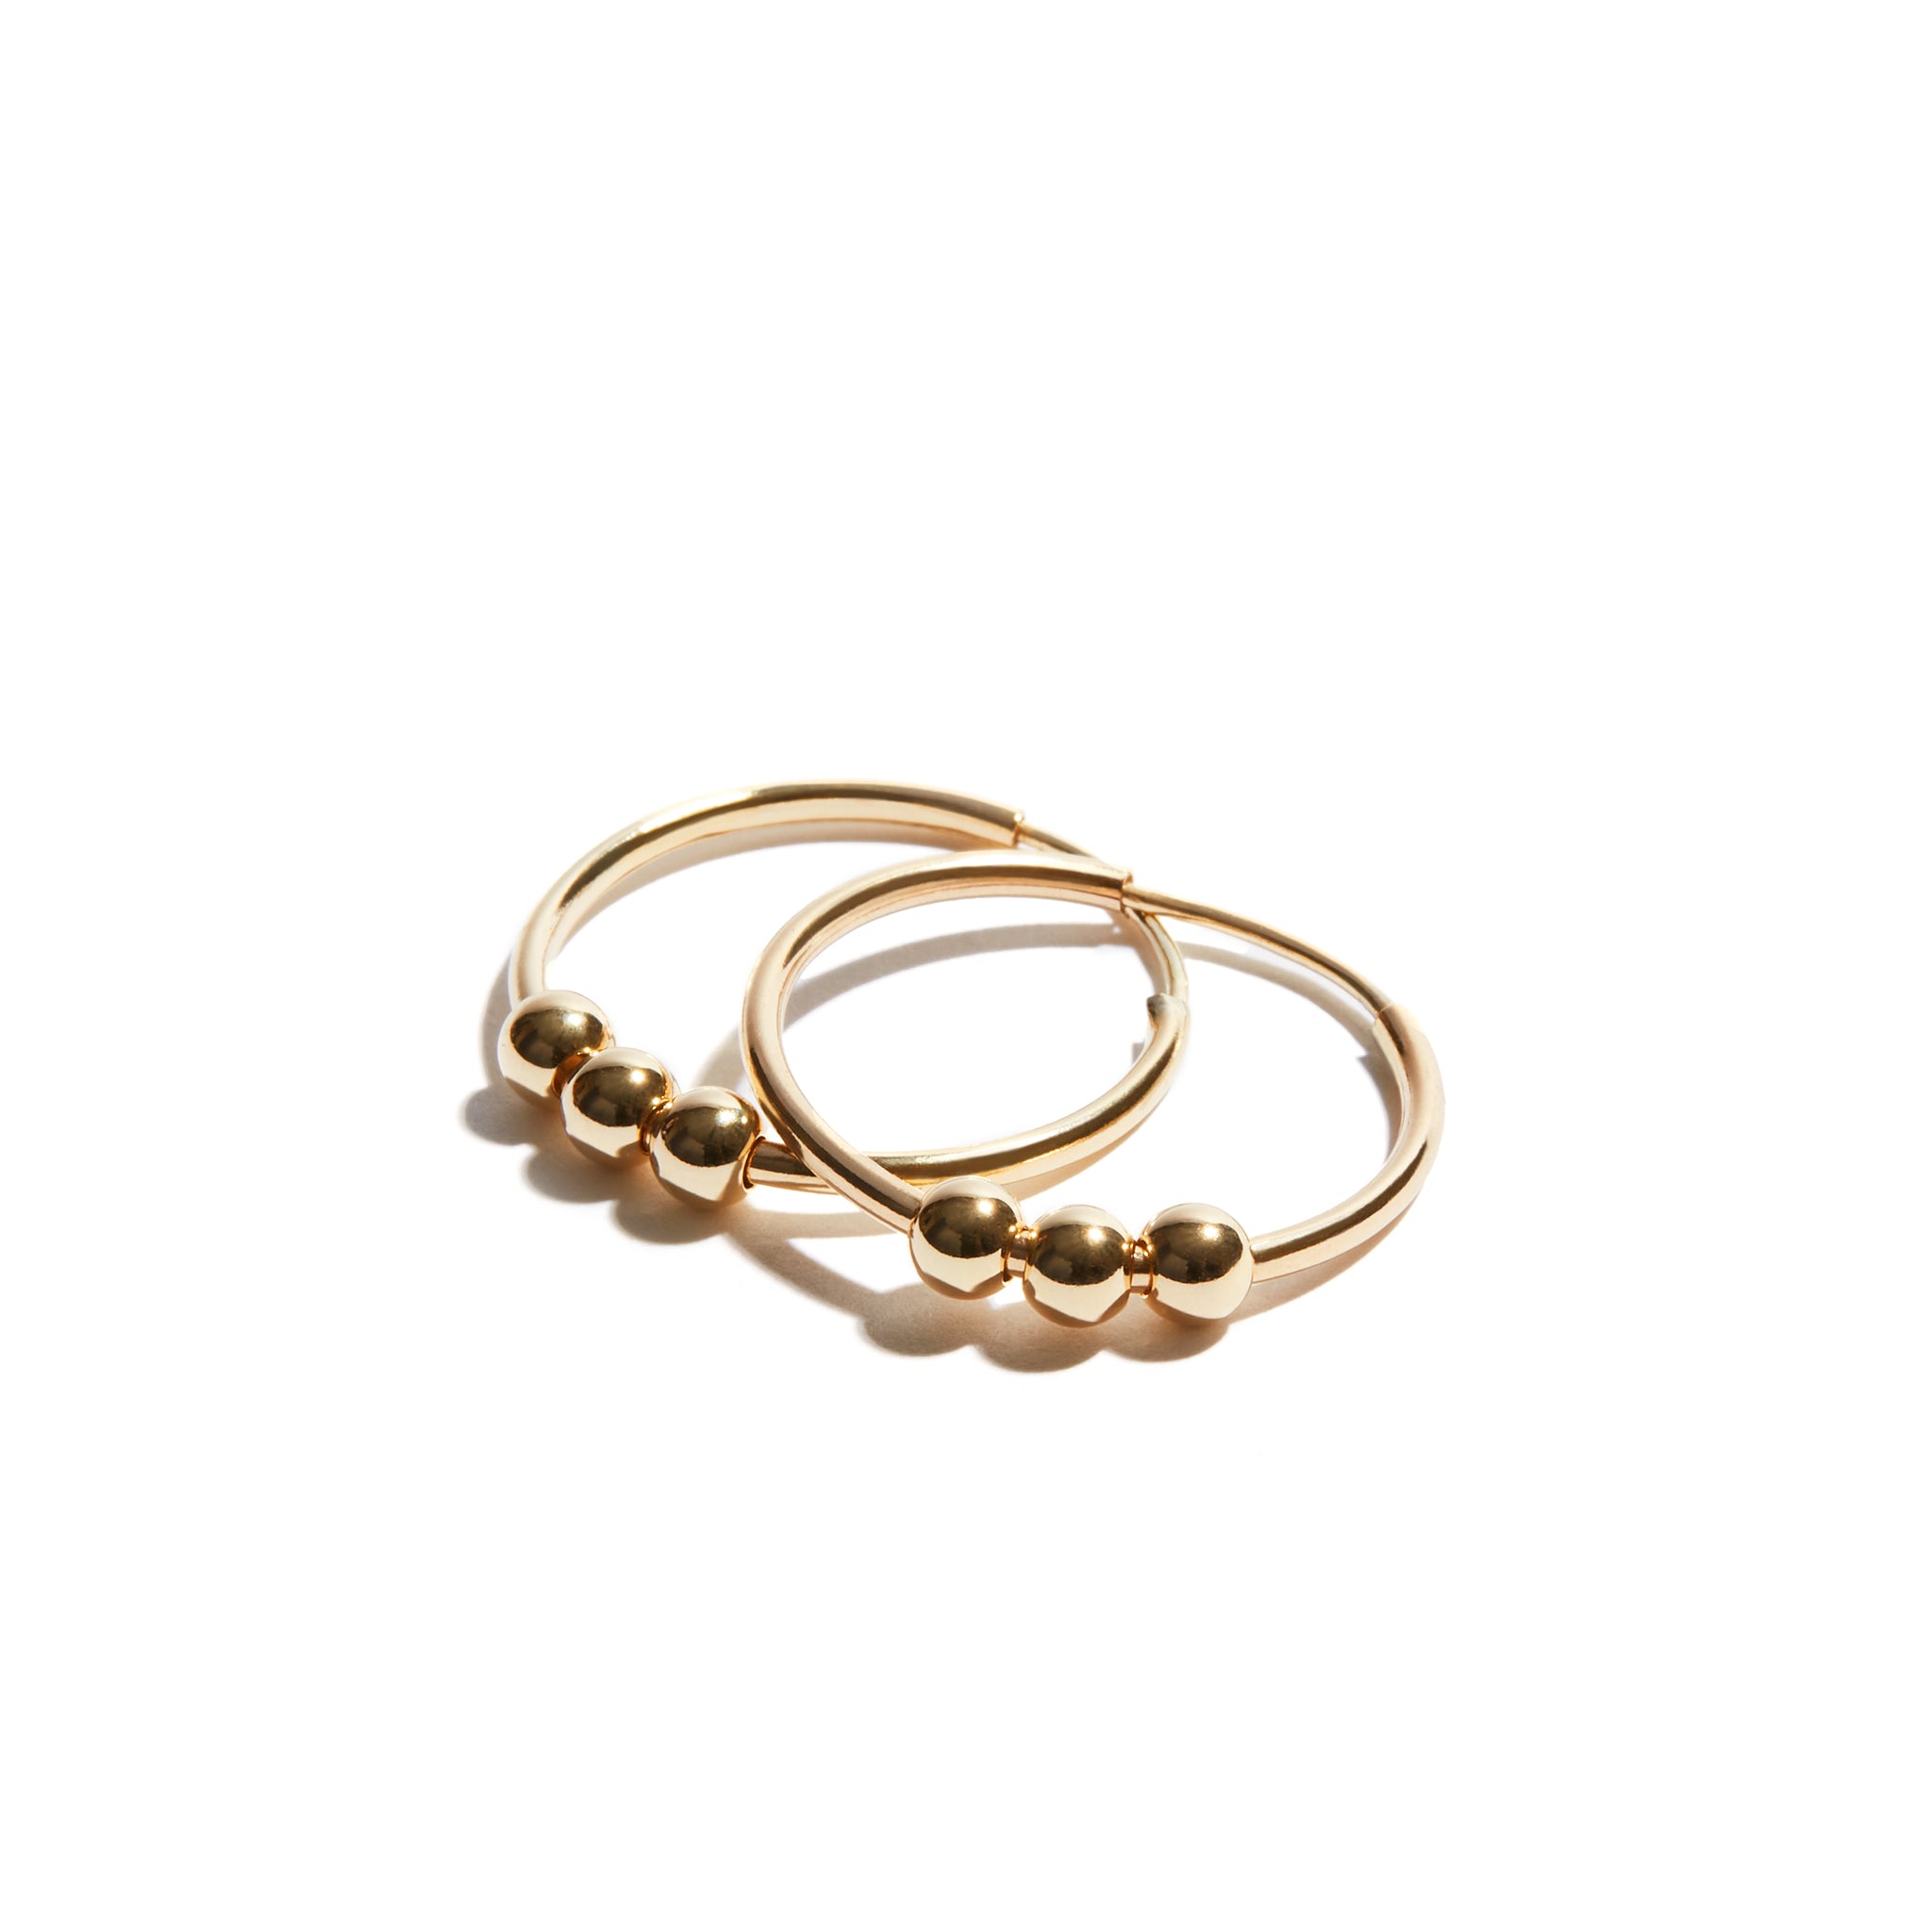 Chic Ball Hoop Earrings made from 14ct gold fill, featuring a delicate hoop design with three stylish balls, perfect for adding a touch of charm to any outfit.